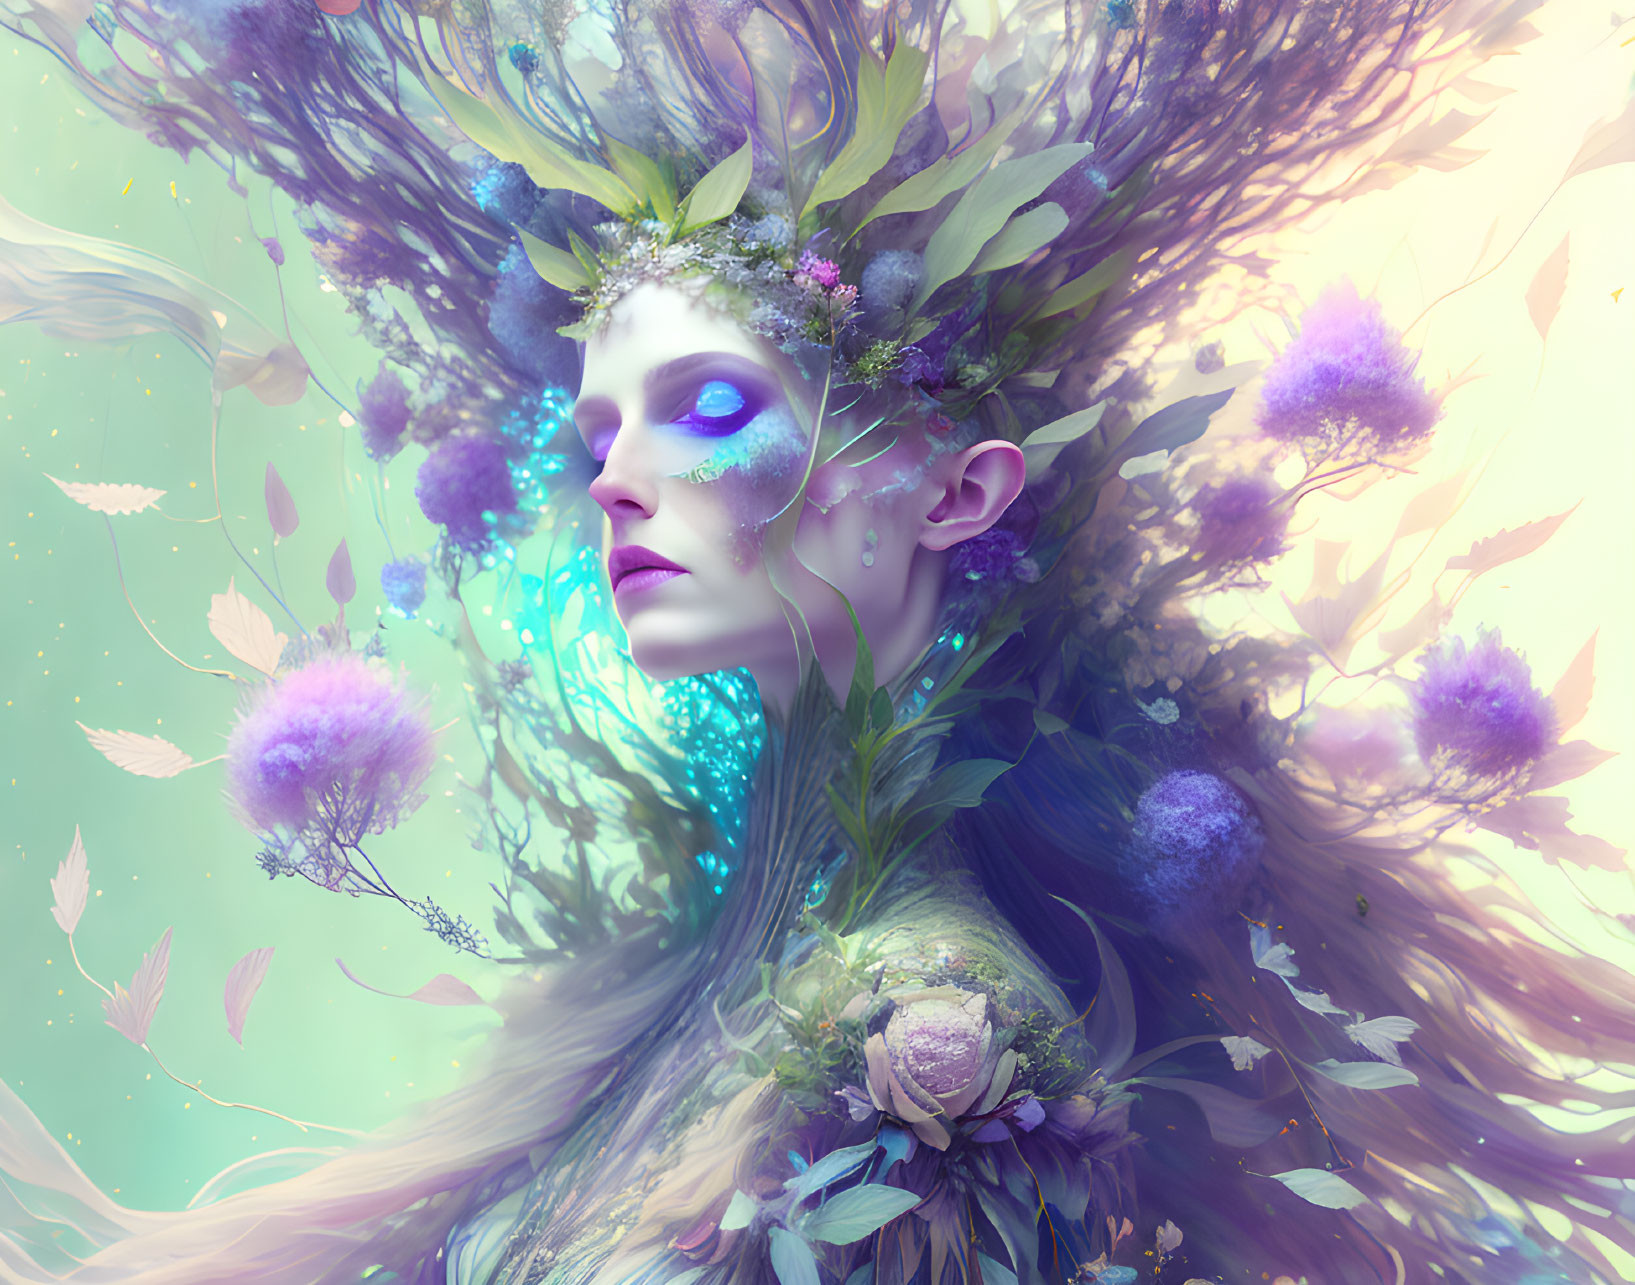 Ethereal figure with crown of leaves and blue skin markings